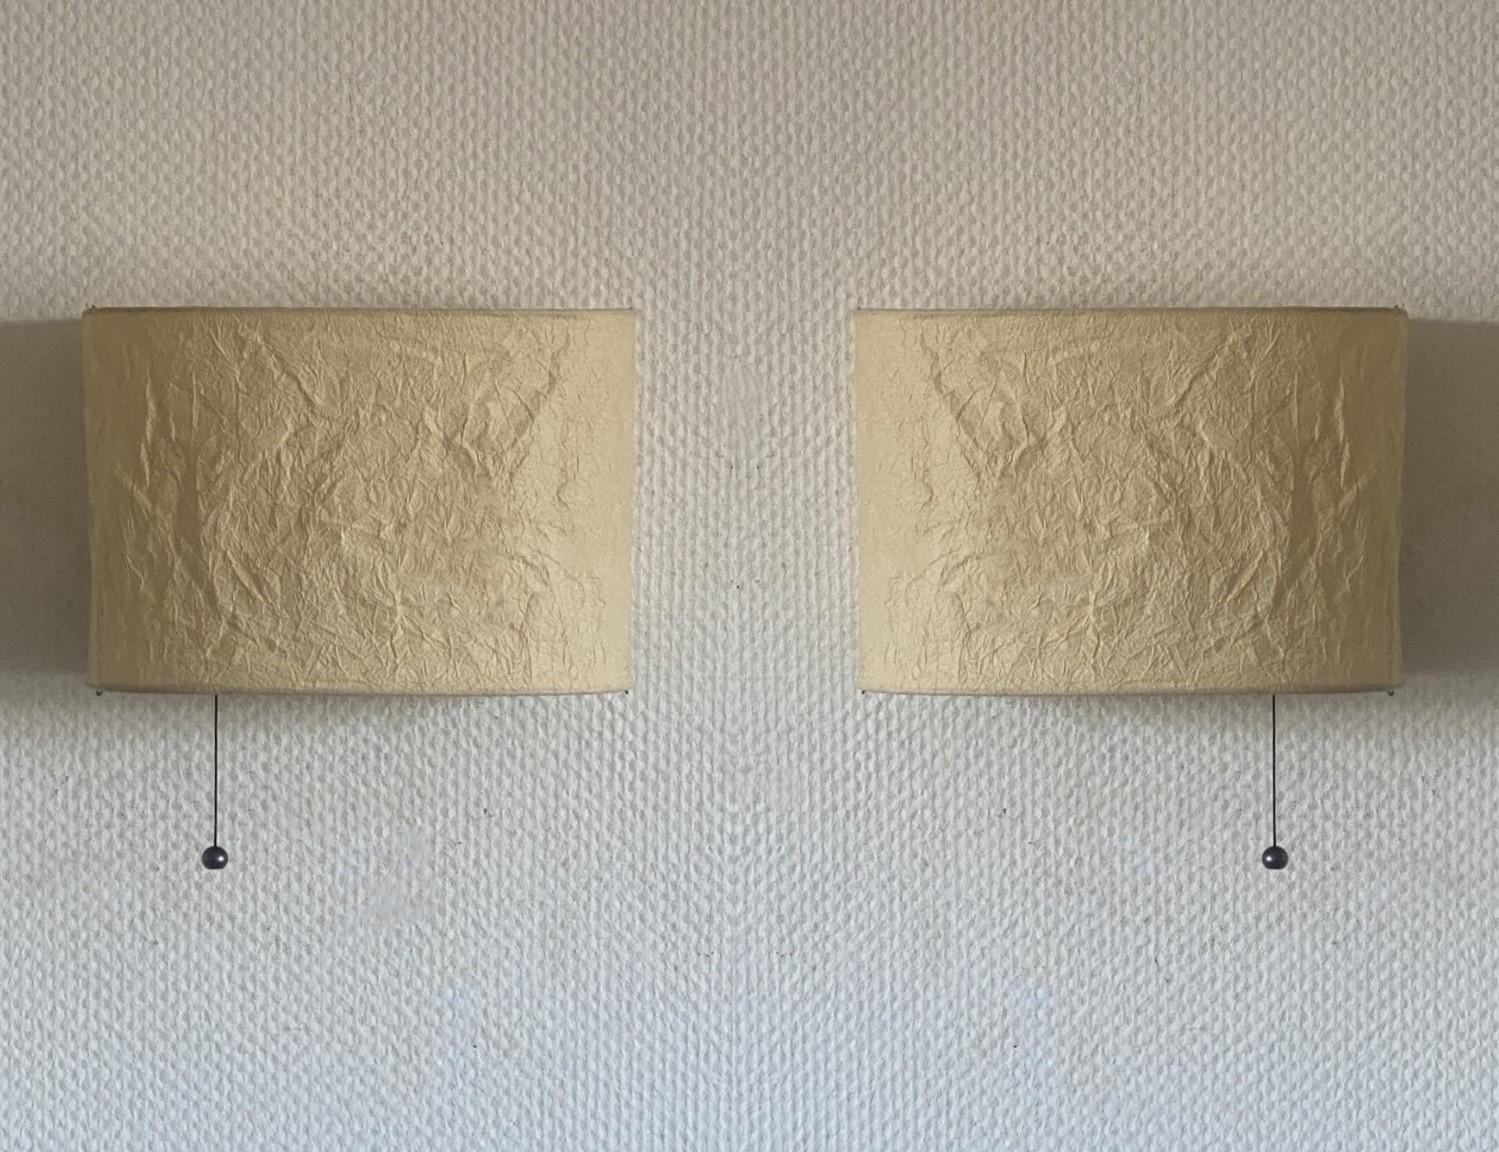 A Pair of rare swedish design wall lights of parchment paper and metal wall, Sweden, 1980s. Both sconces in fine vintage condition, no damages. Each sconce takes one E27 screw base lbulb.
Dimentions:
Width 12